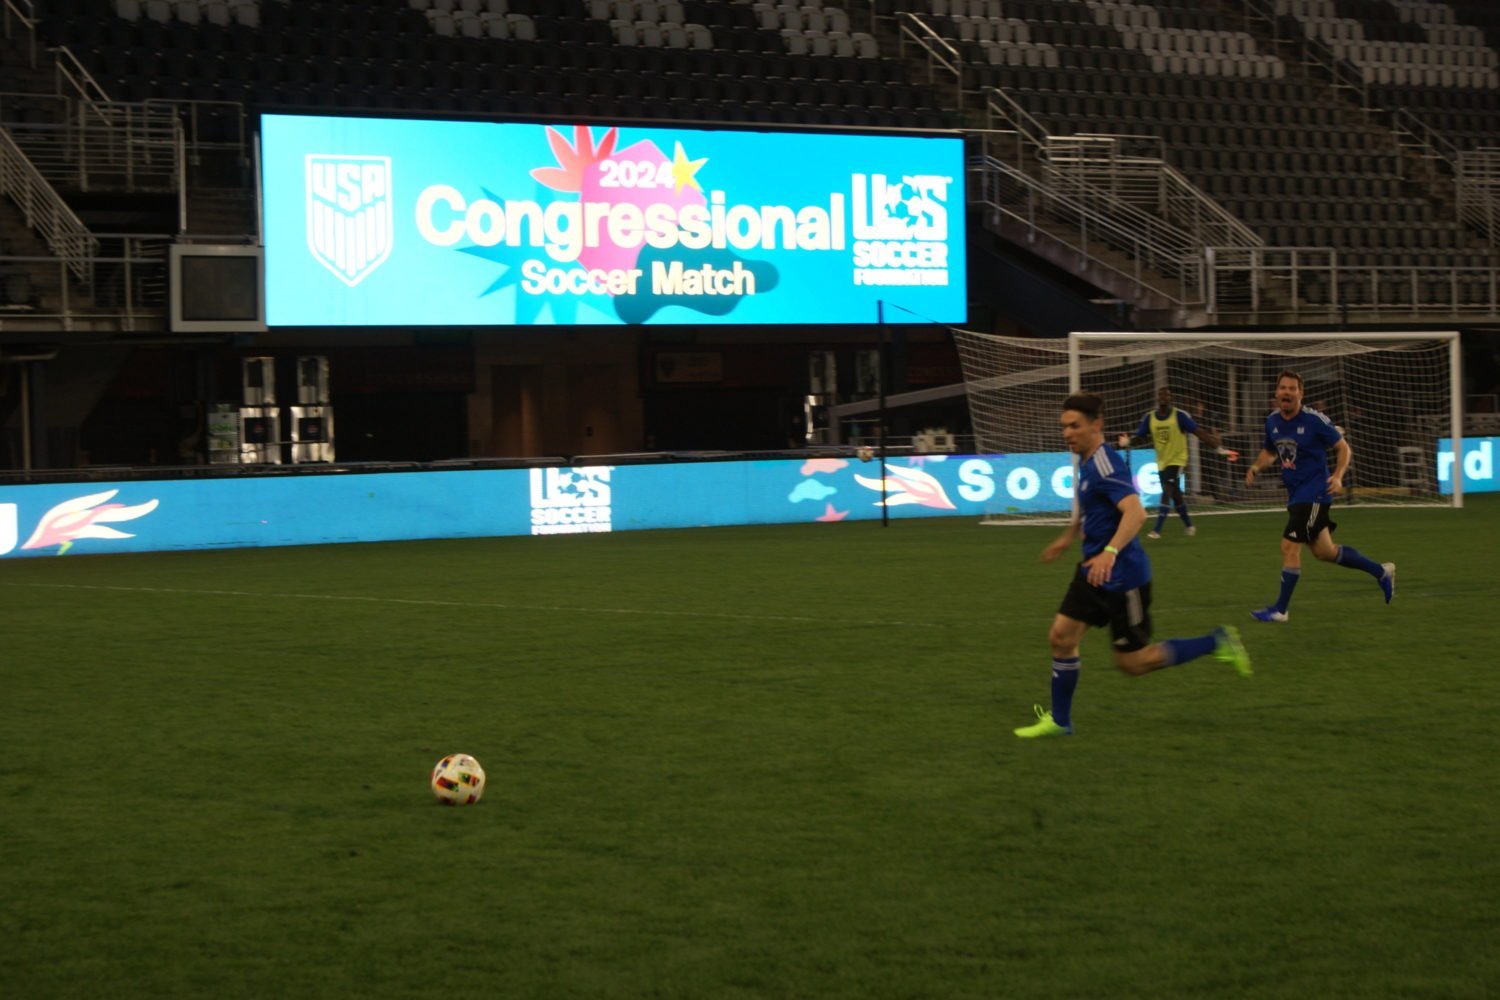 Rep. Morgan McGarvey (D-KY) chases the ball at the Congressional Soccer Game.